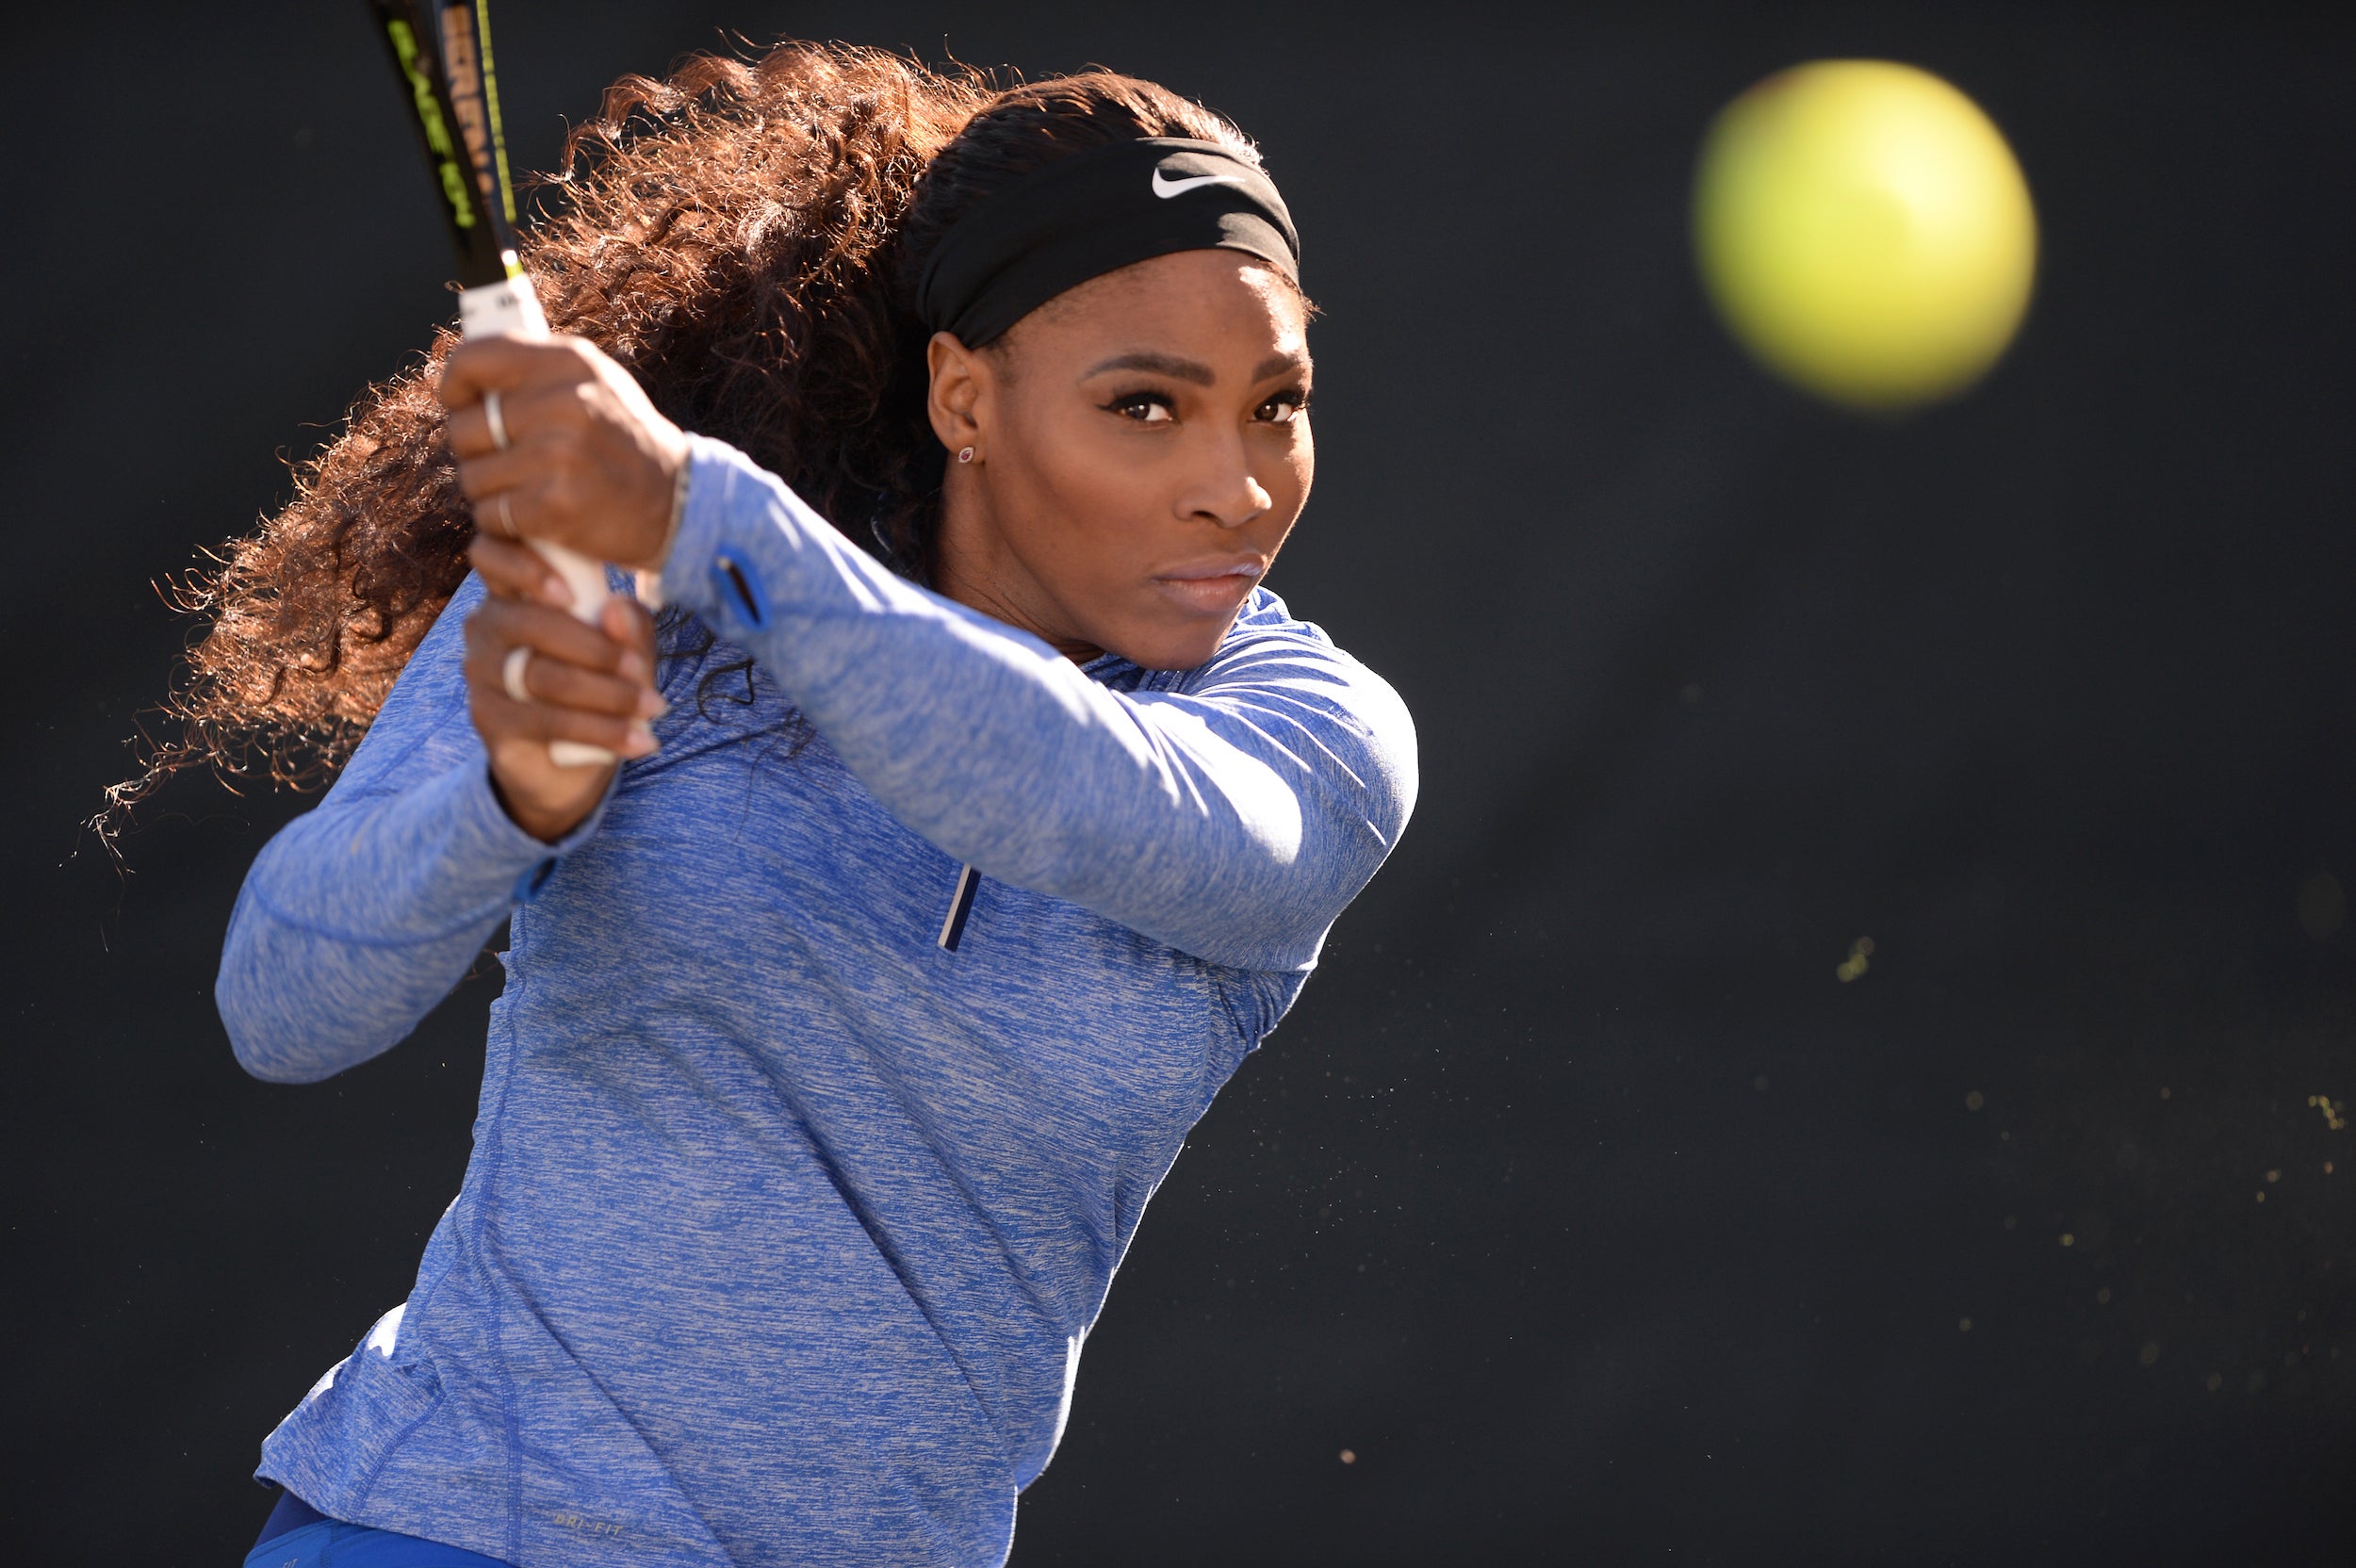 Can watching Serena Williams online make you a better tennis player?